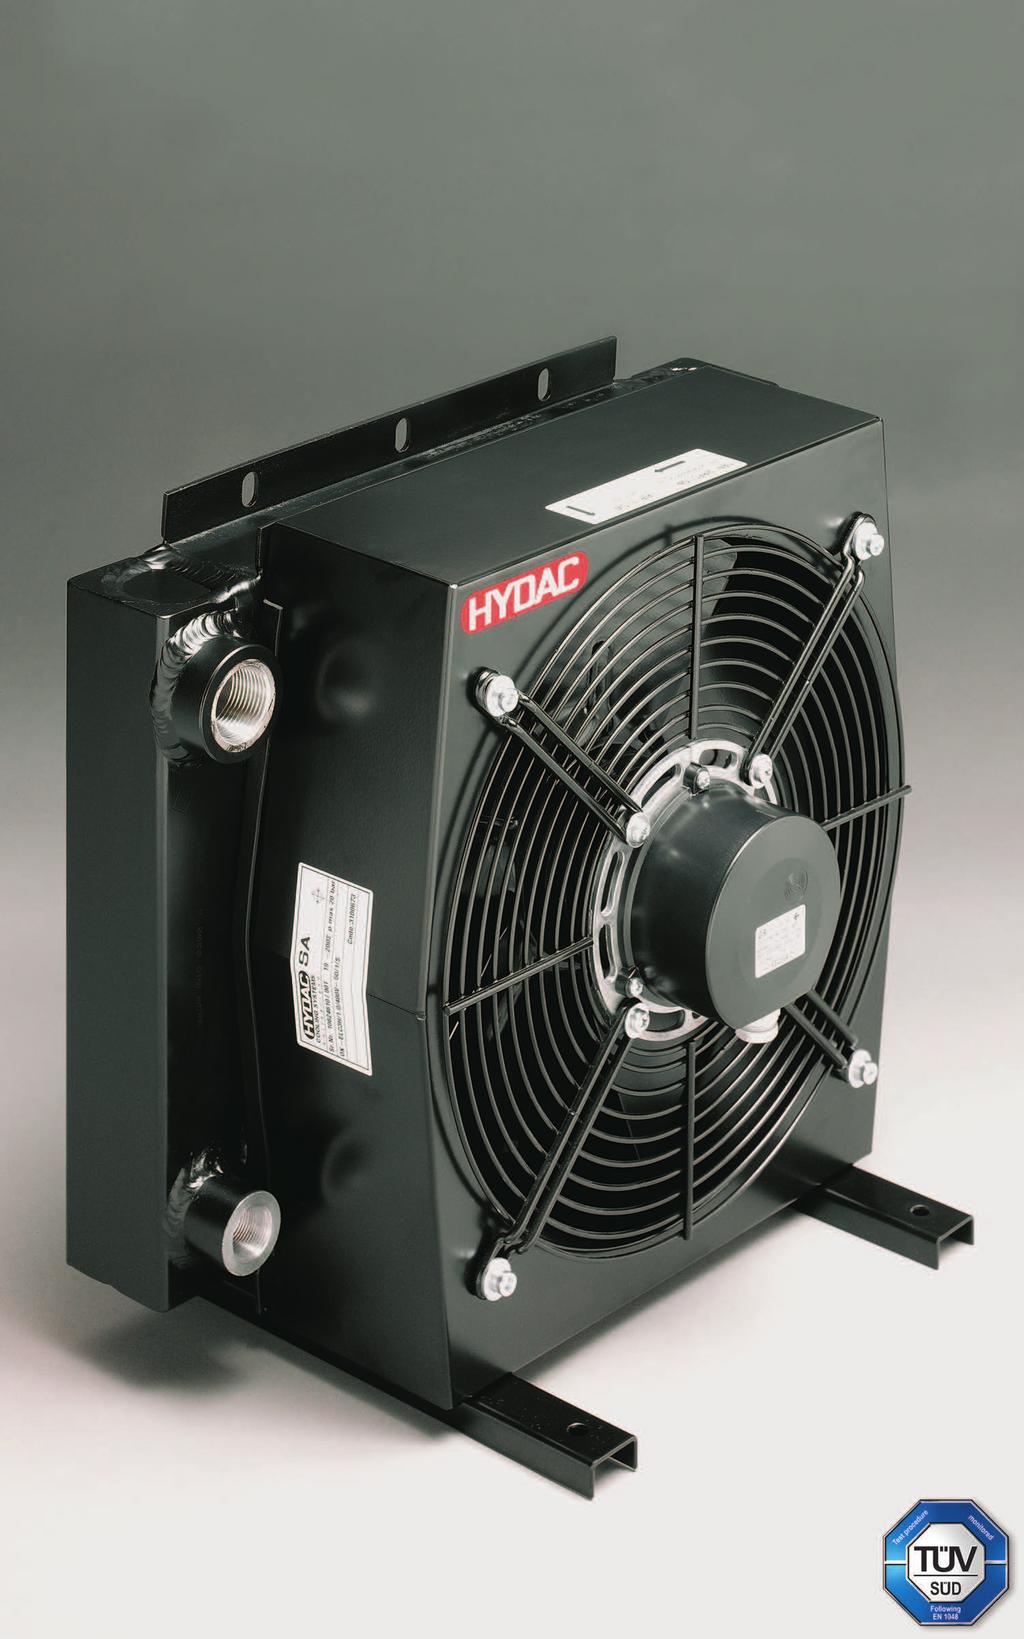 COMPACT OIL / AIR COOLERS NEW COMPACT DESIGN WITH AC ELECTRIC FANS AND HIGH COOLING PERFORMANCE Application These coolers are designed specifically for hydraulic applications where high performance